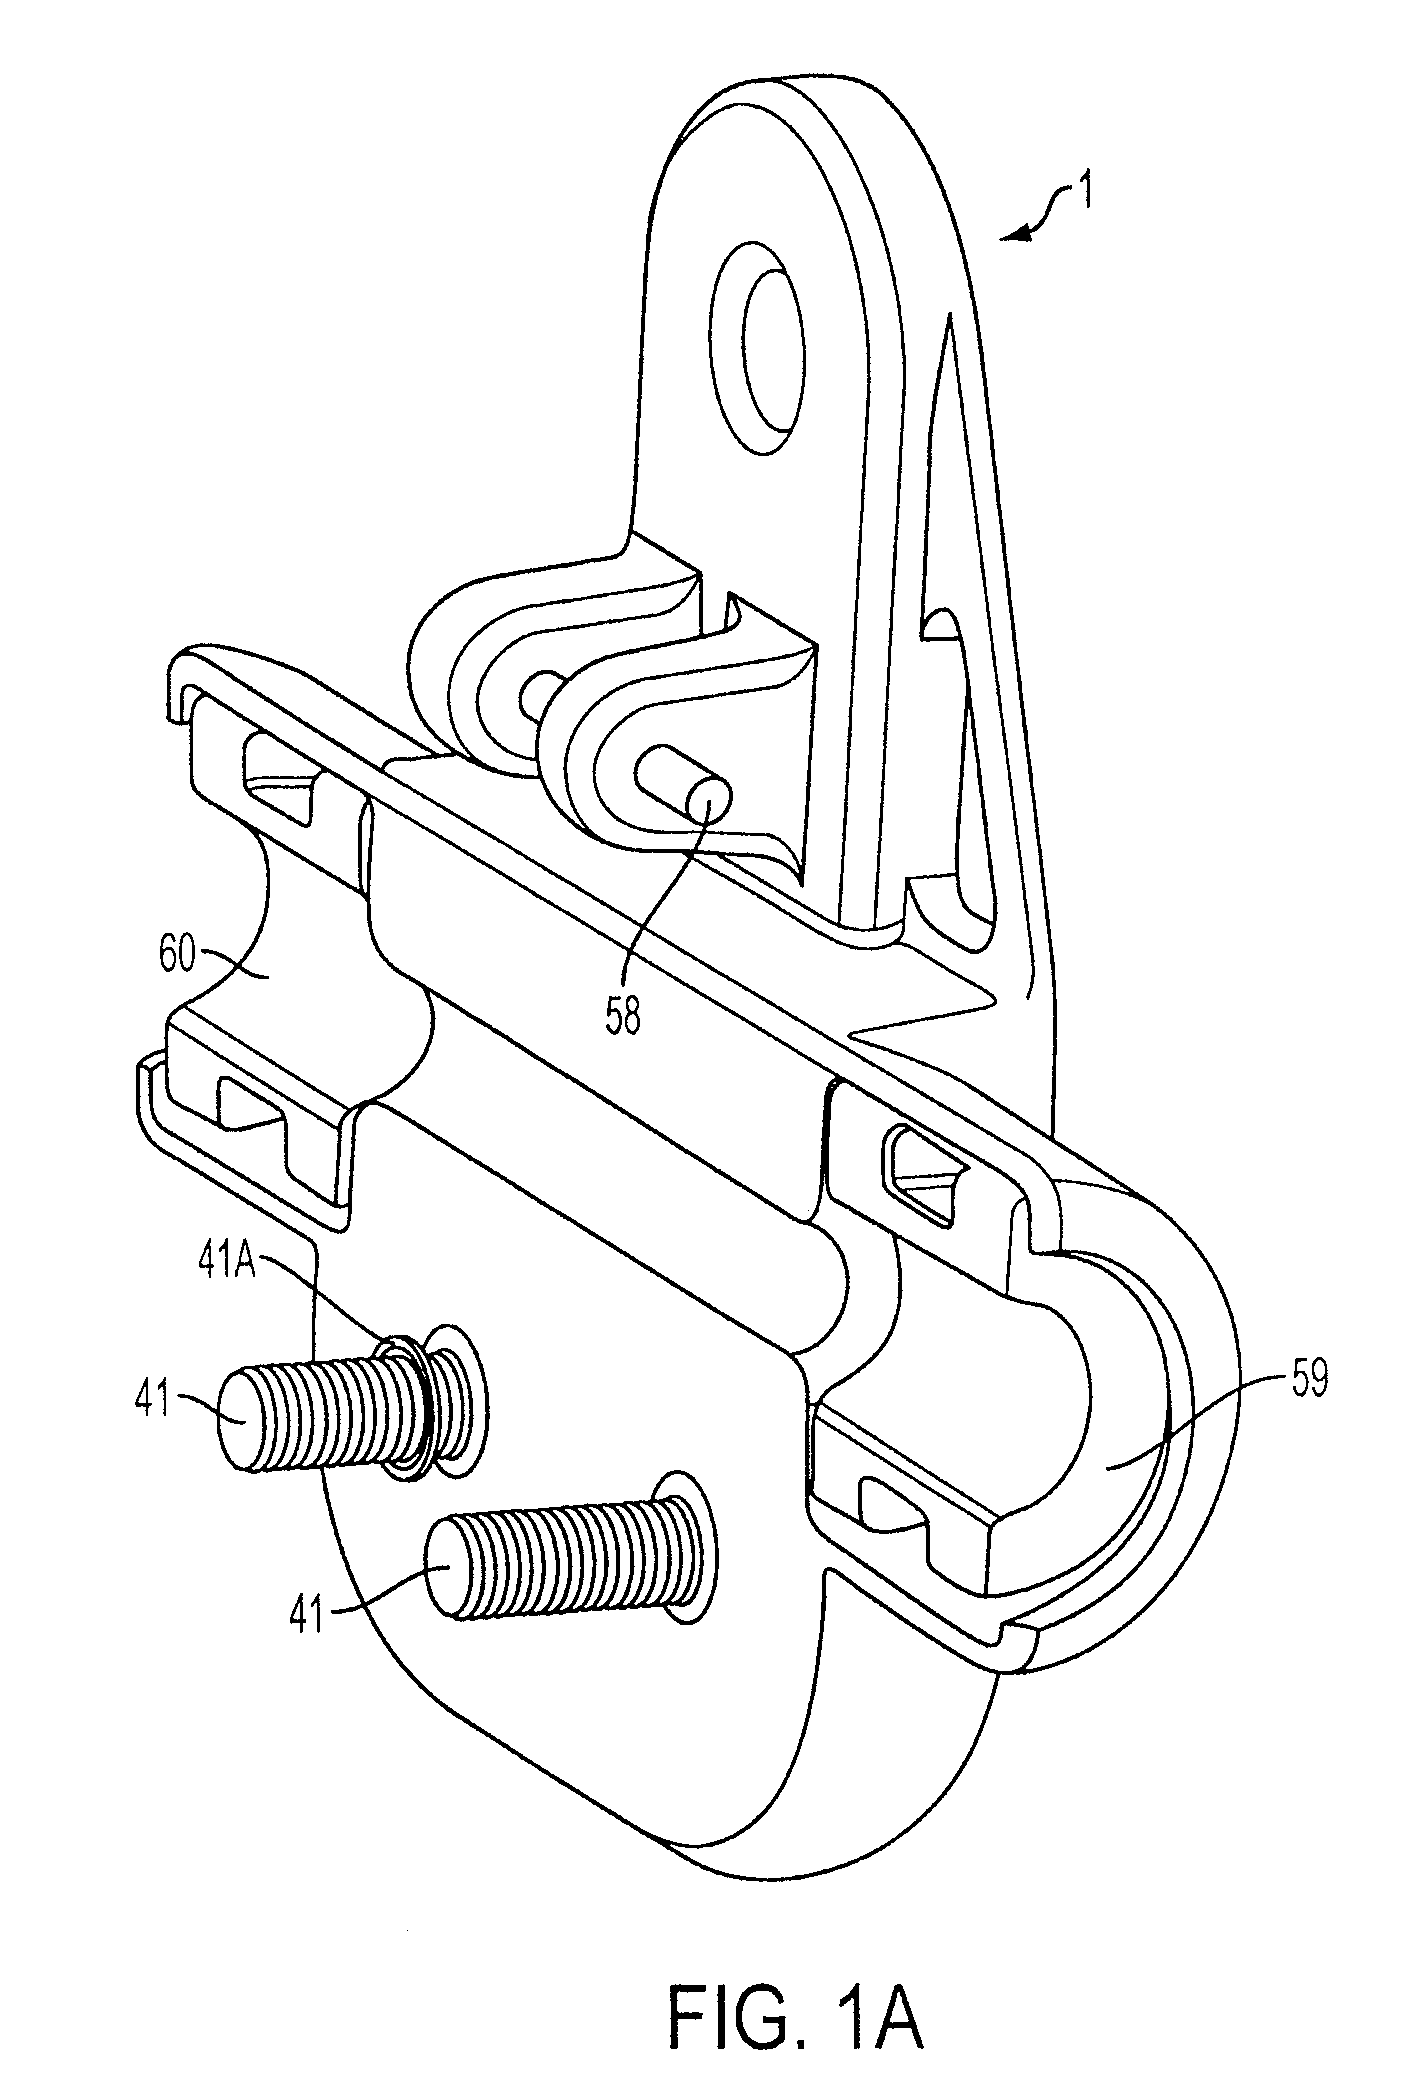 Hinged bushing suspension clamp and method for using said clamp